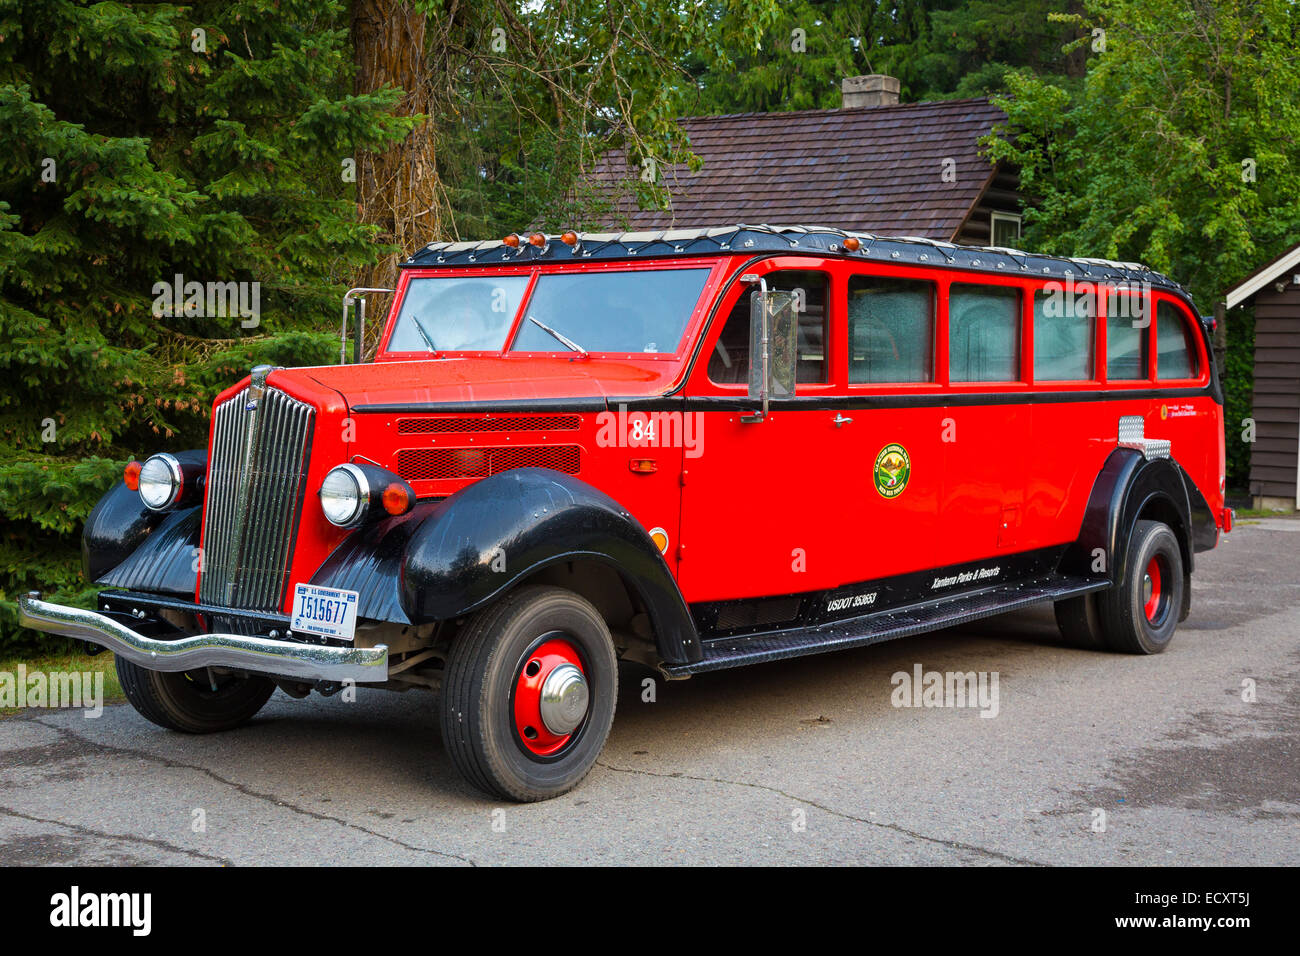 Red Jammers are buses used at Glacier National Park in the United States to transport park visitors. Stock Photo